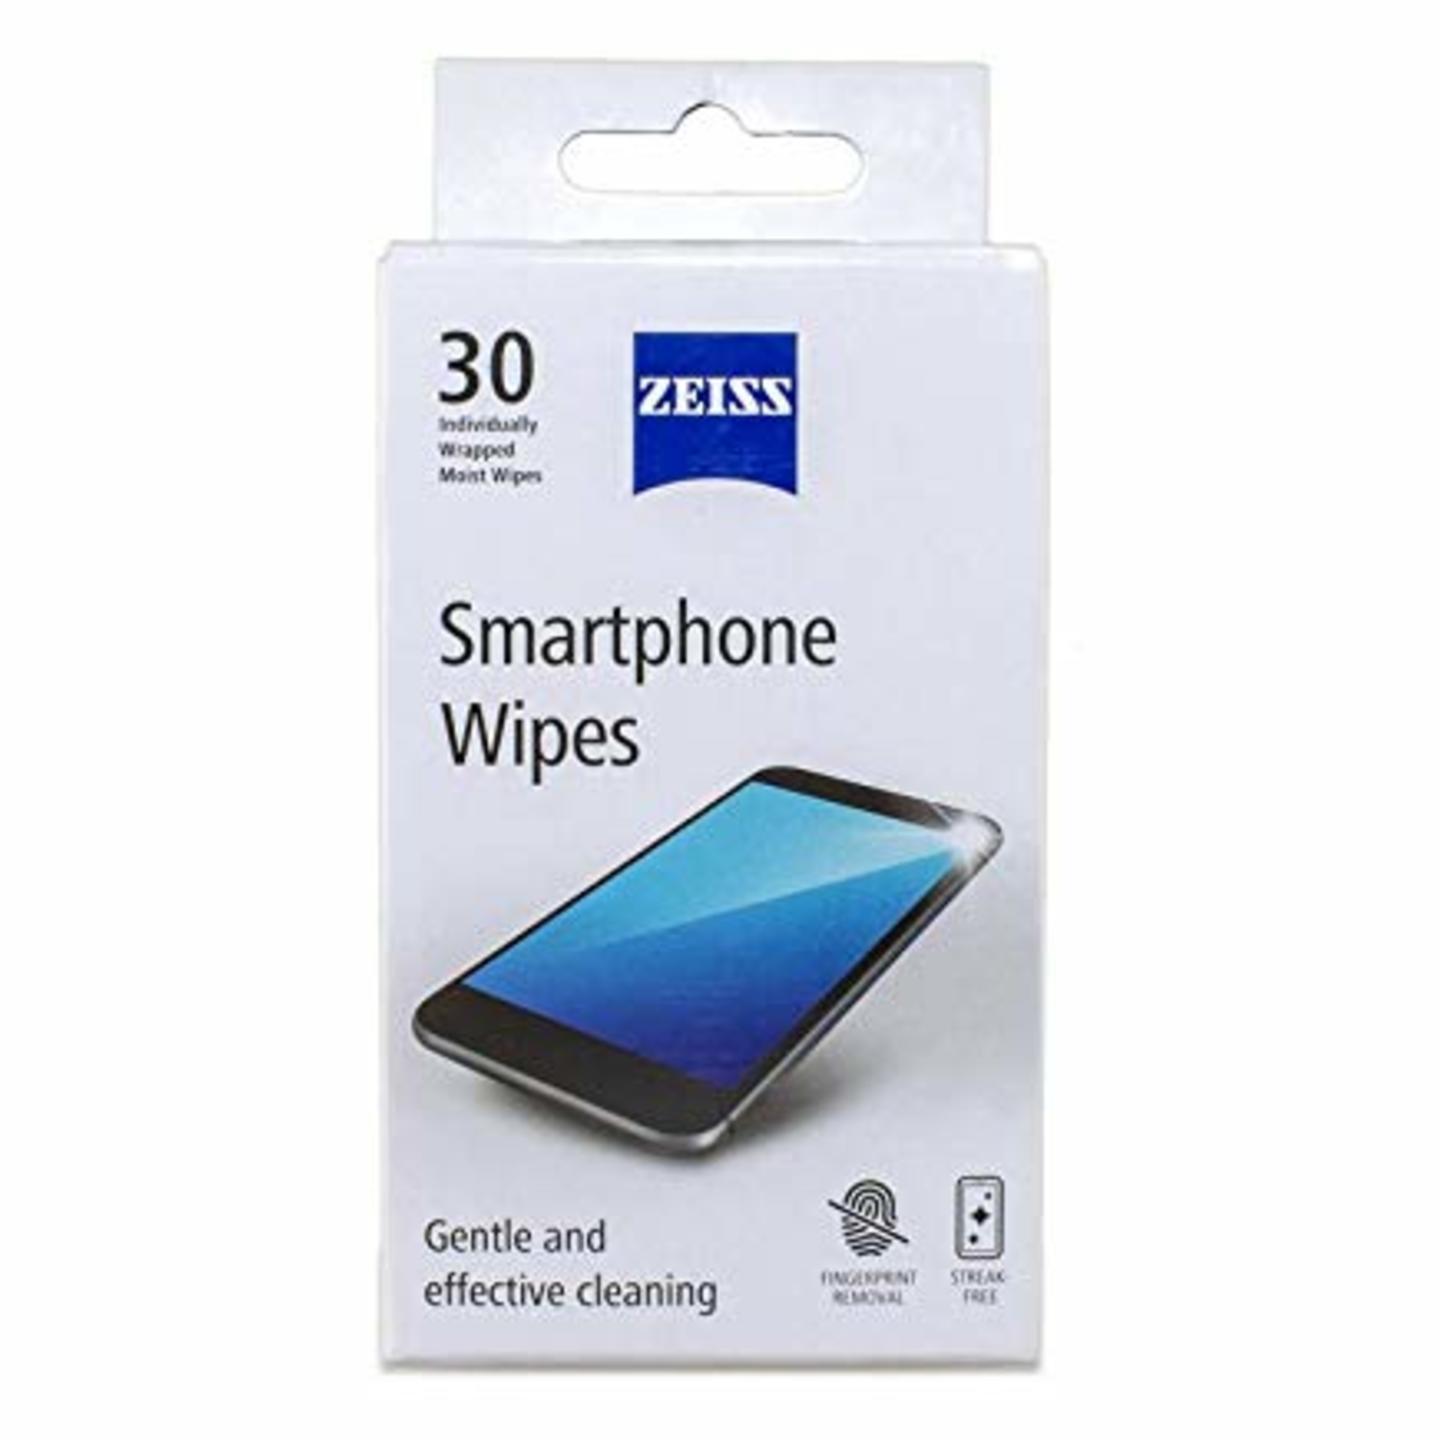 ZEISS Smartphone Wipes - Pack of 30